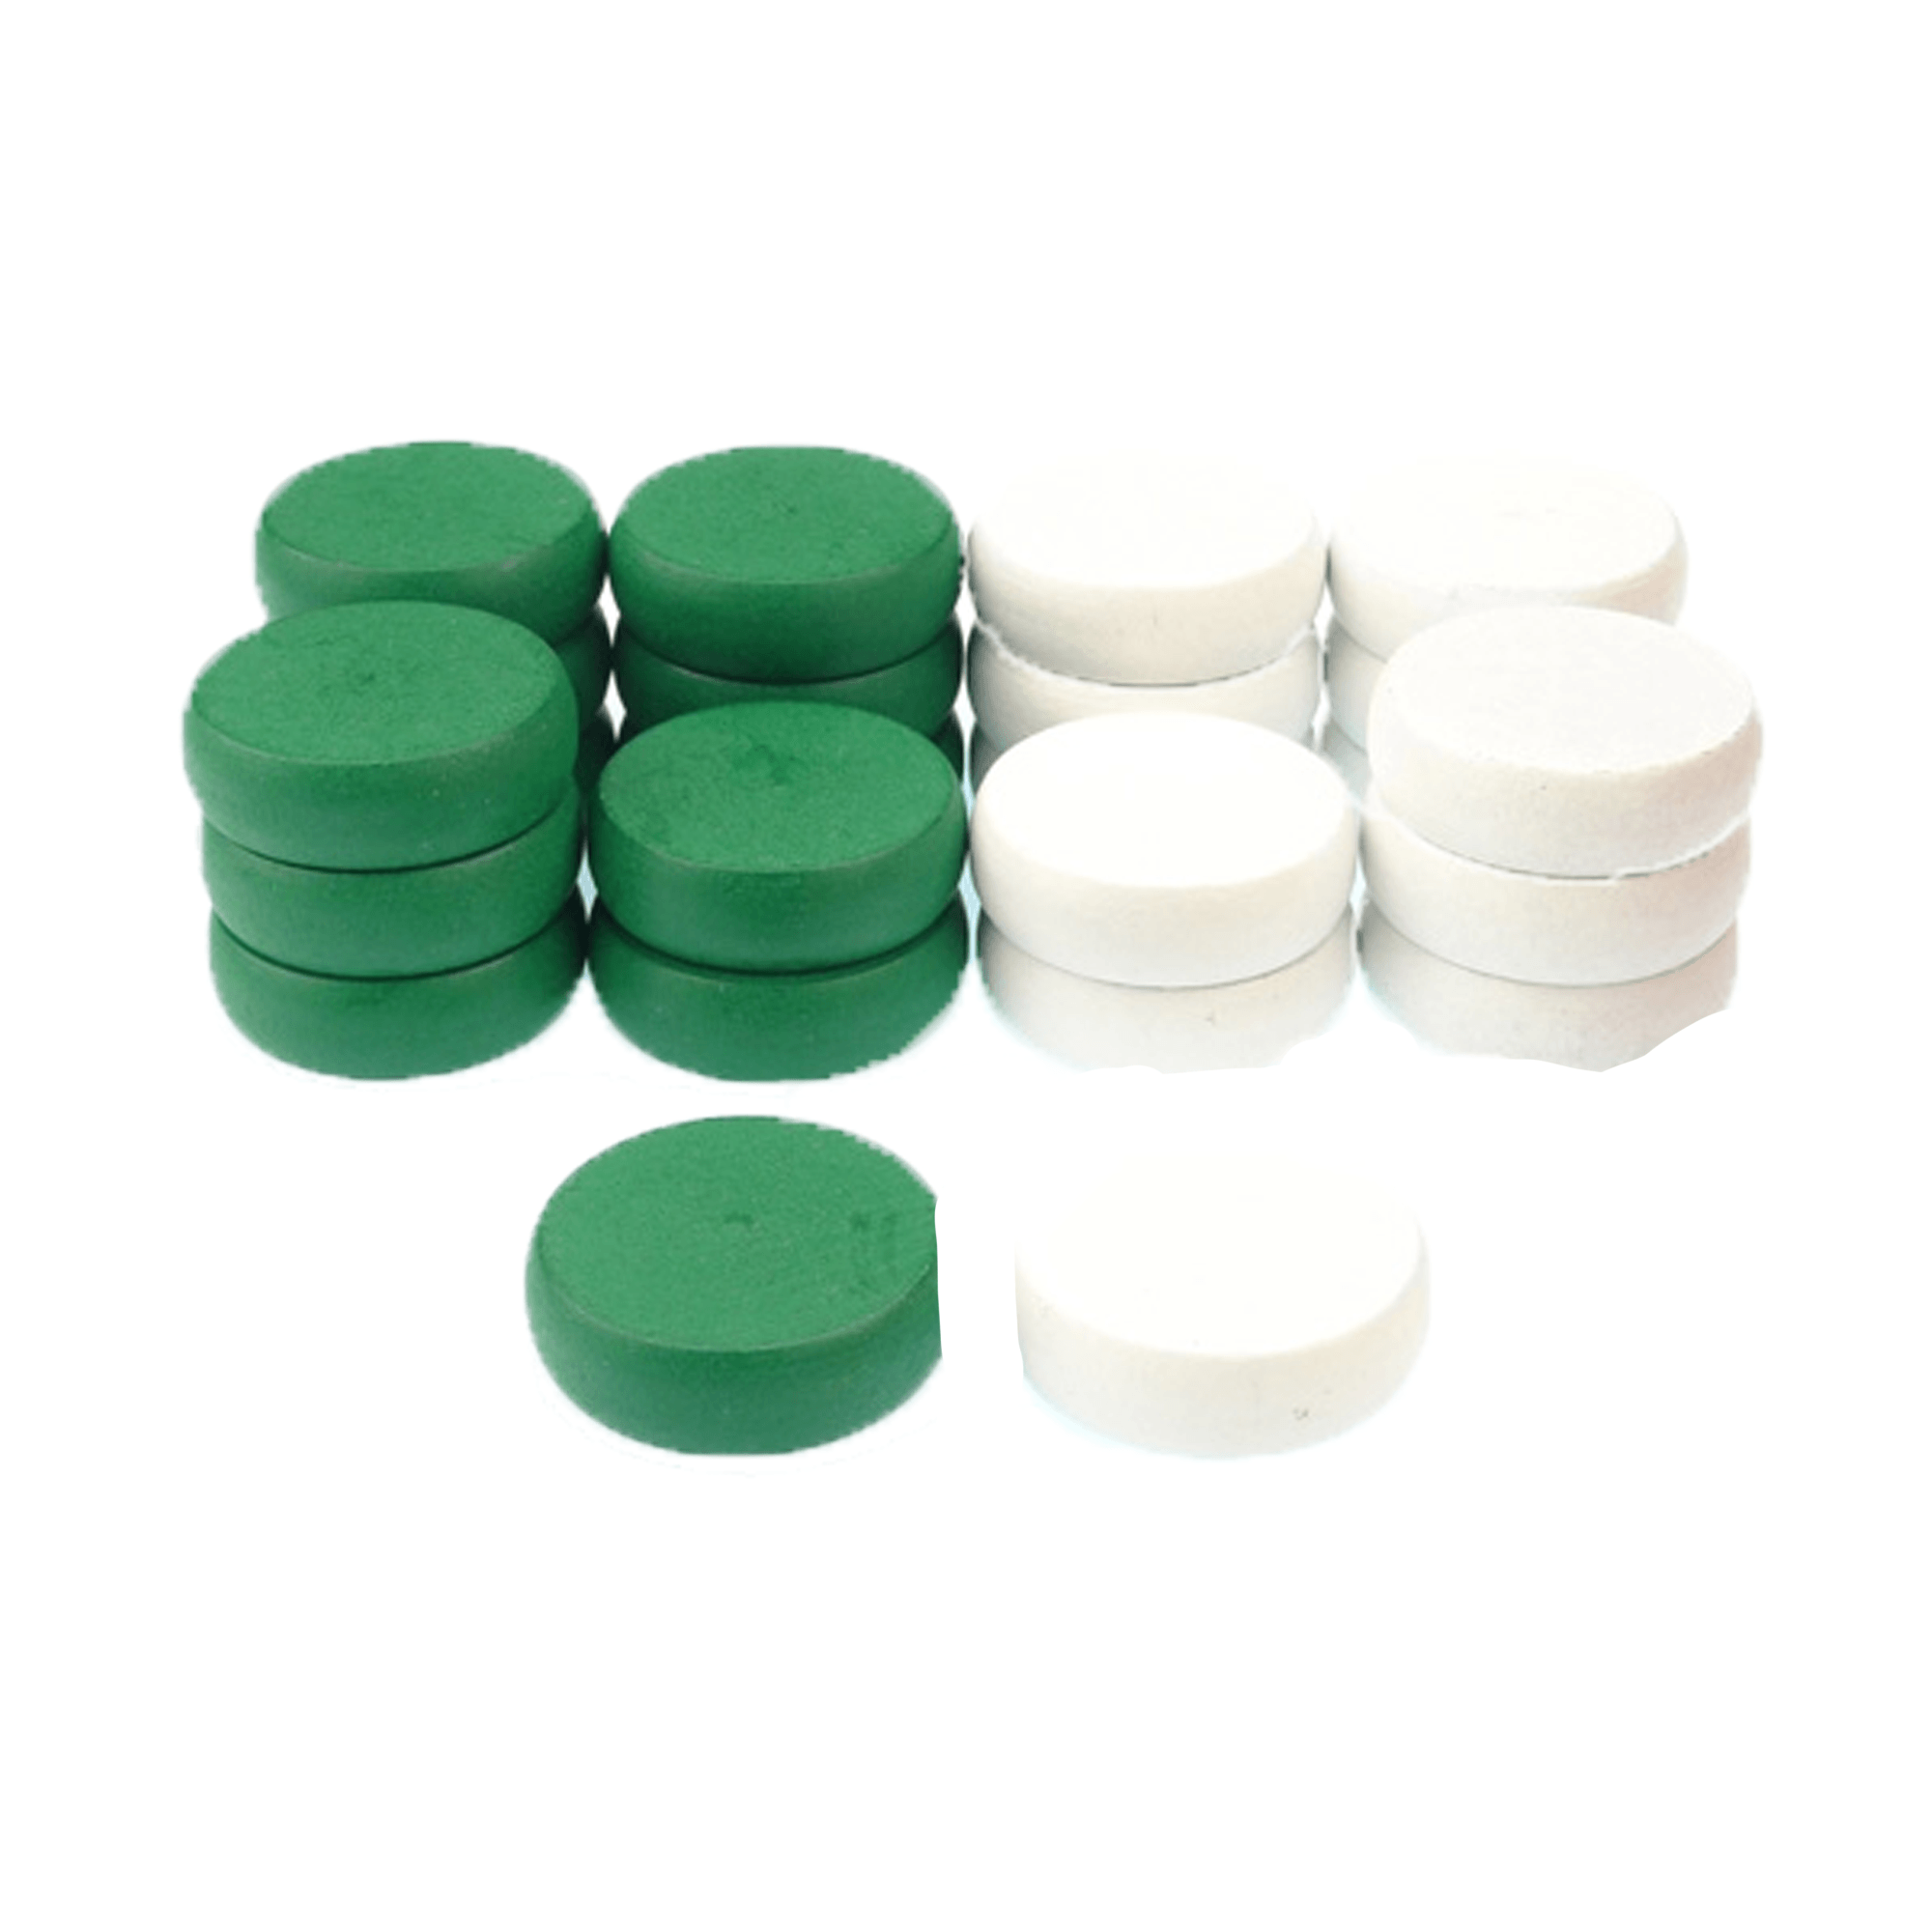 Crokinole Tournament Discs - 13 Green and 13 White - Size 1-1/4" - 24 Needed + 2 Spare Discs - Bag Included - Carrom Alternative